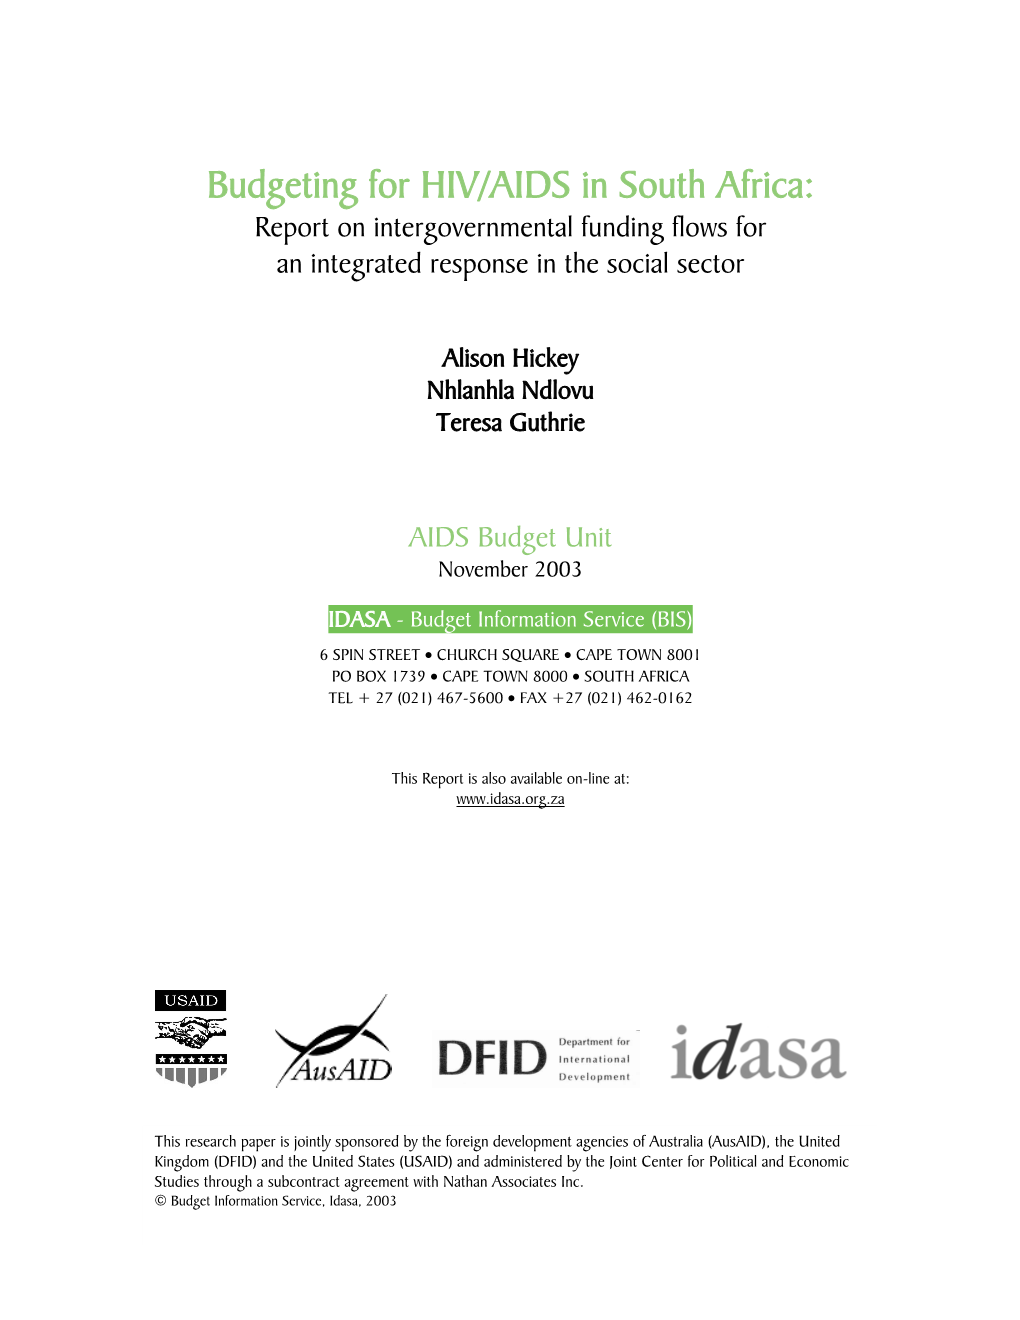 Budgeting for HIV/AIDS in South Africa: Report on Intergovernmental Funding Flows for an Integrated Response in the Social Sector